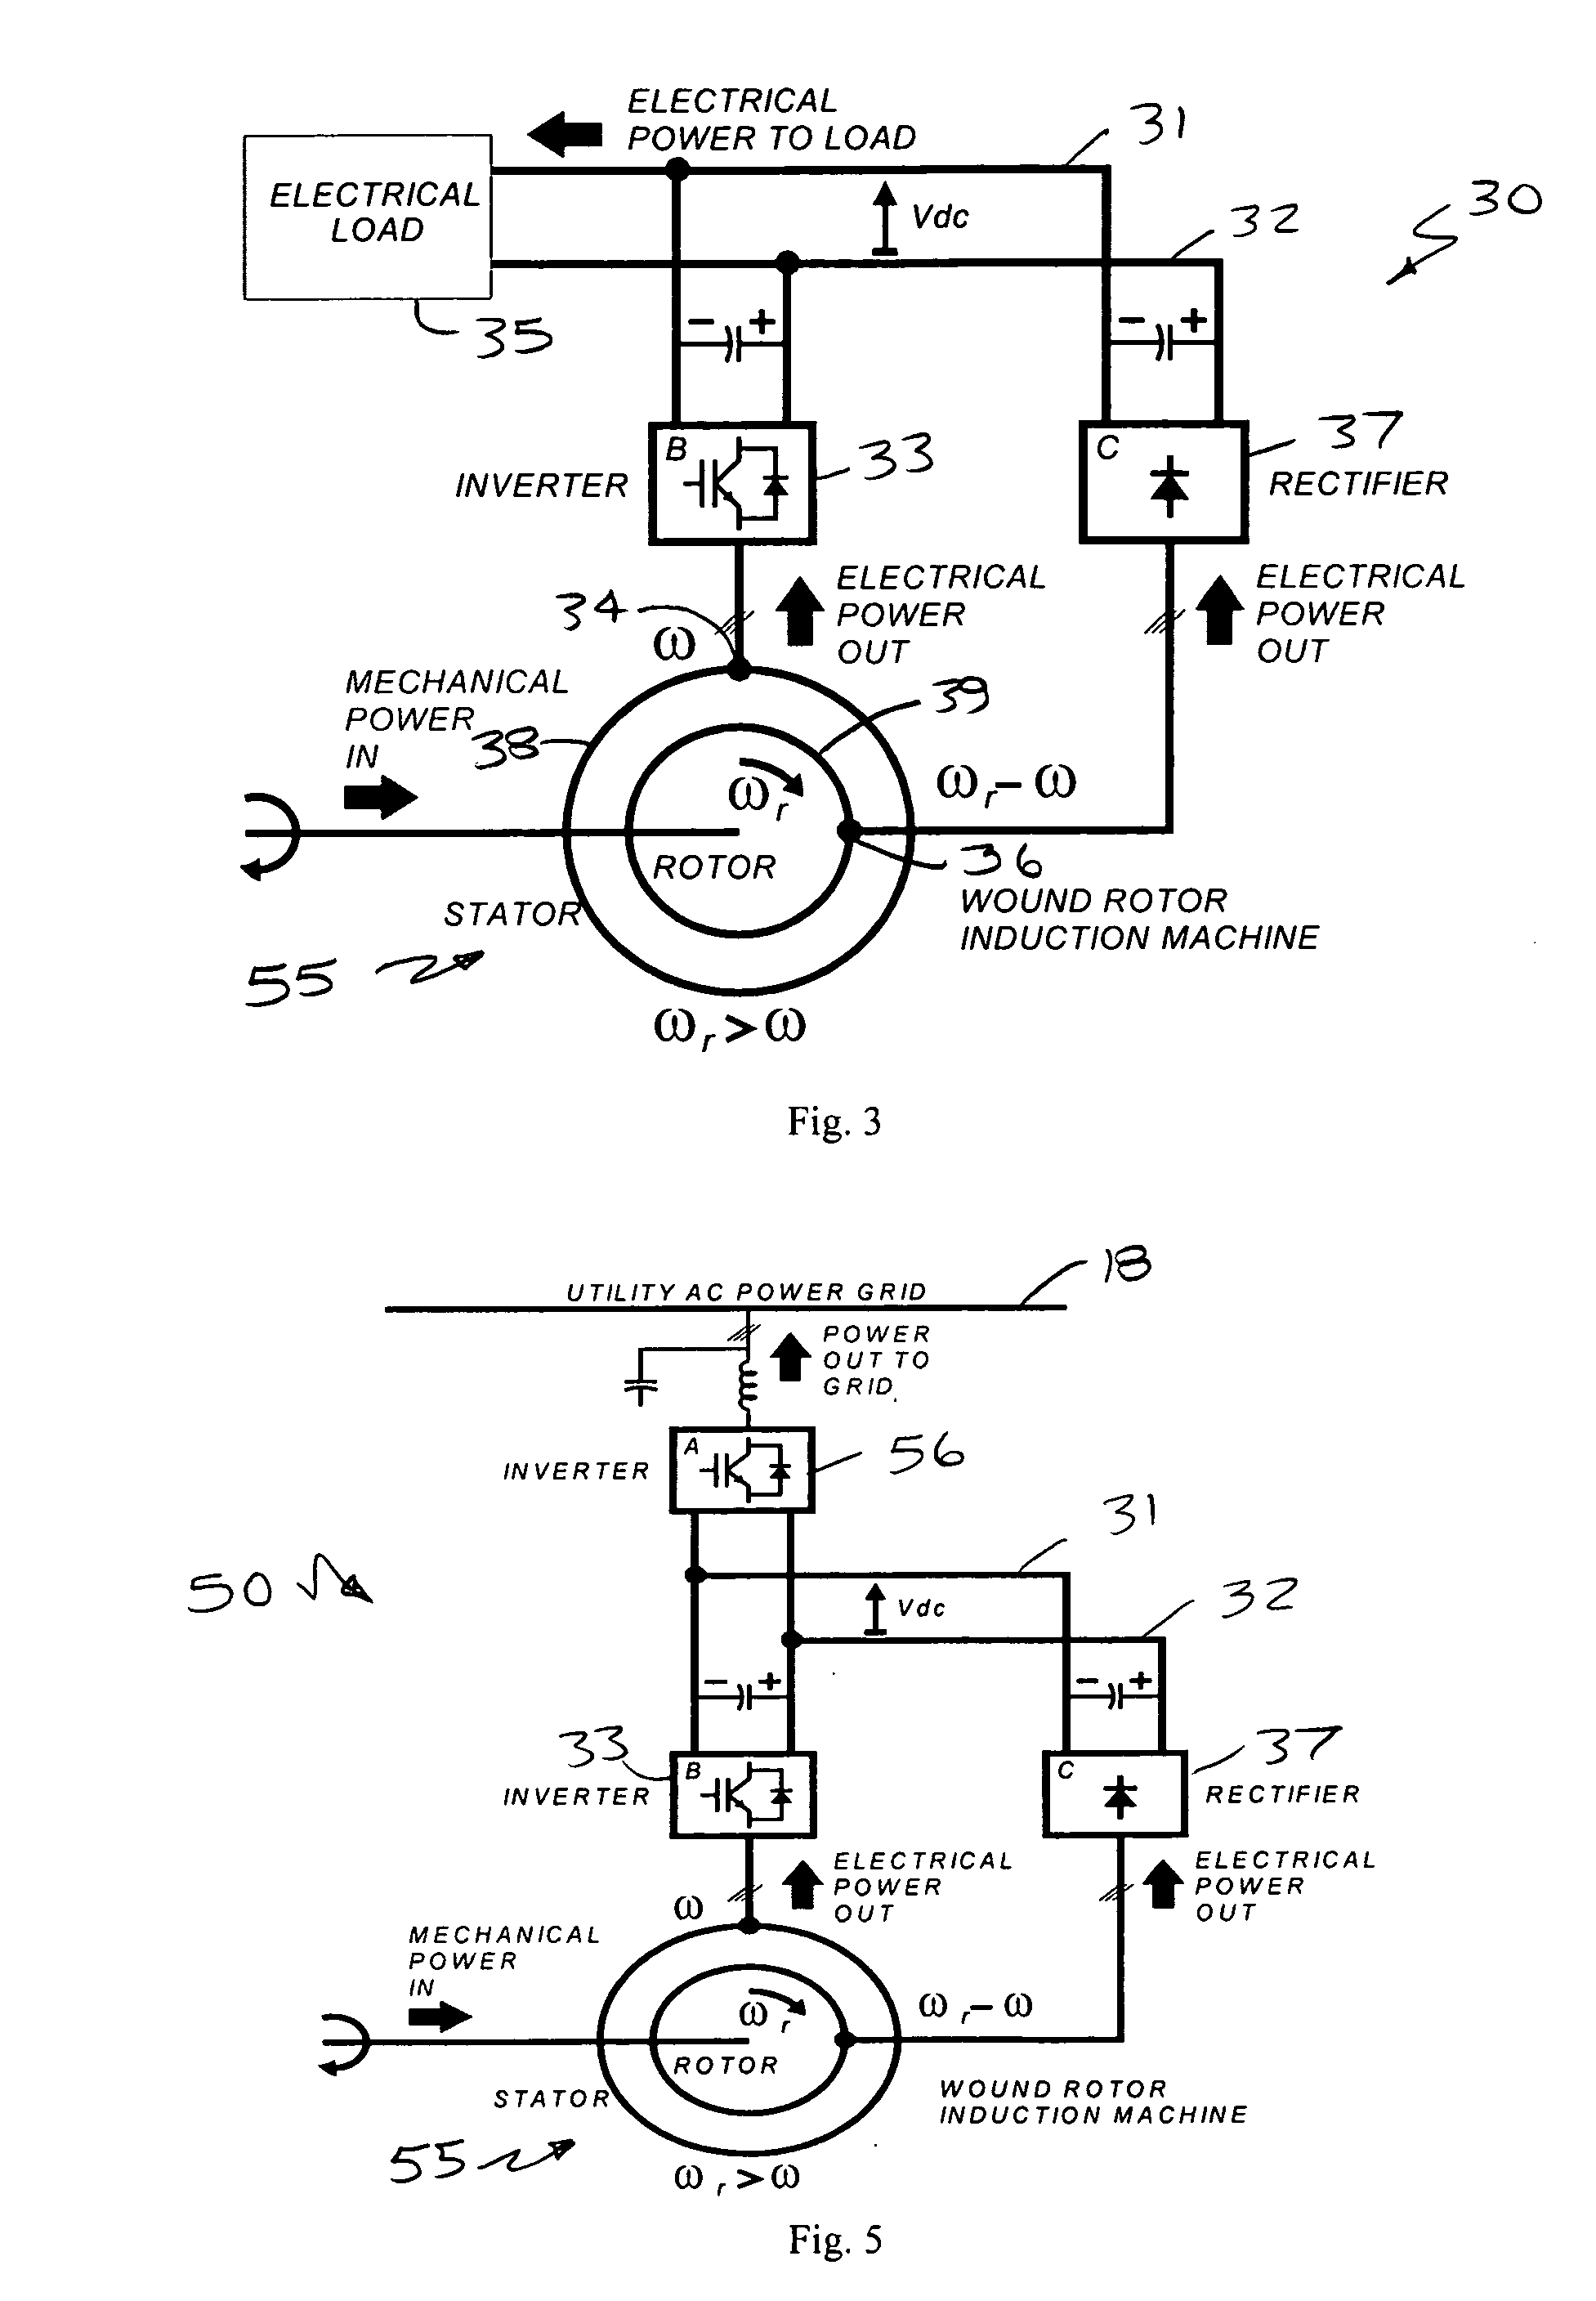 Slip-controlled, wound-rotor induction machine for wind turbine and other applications